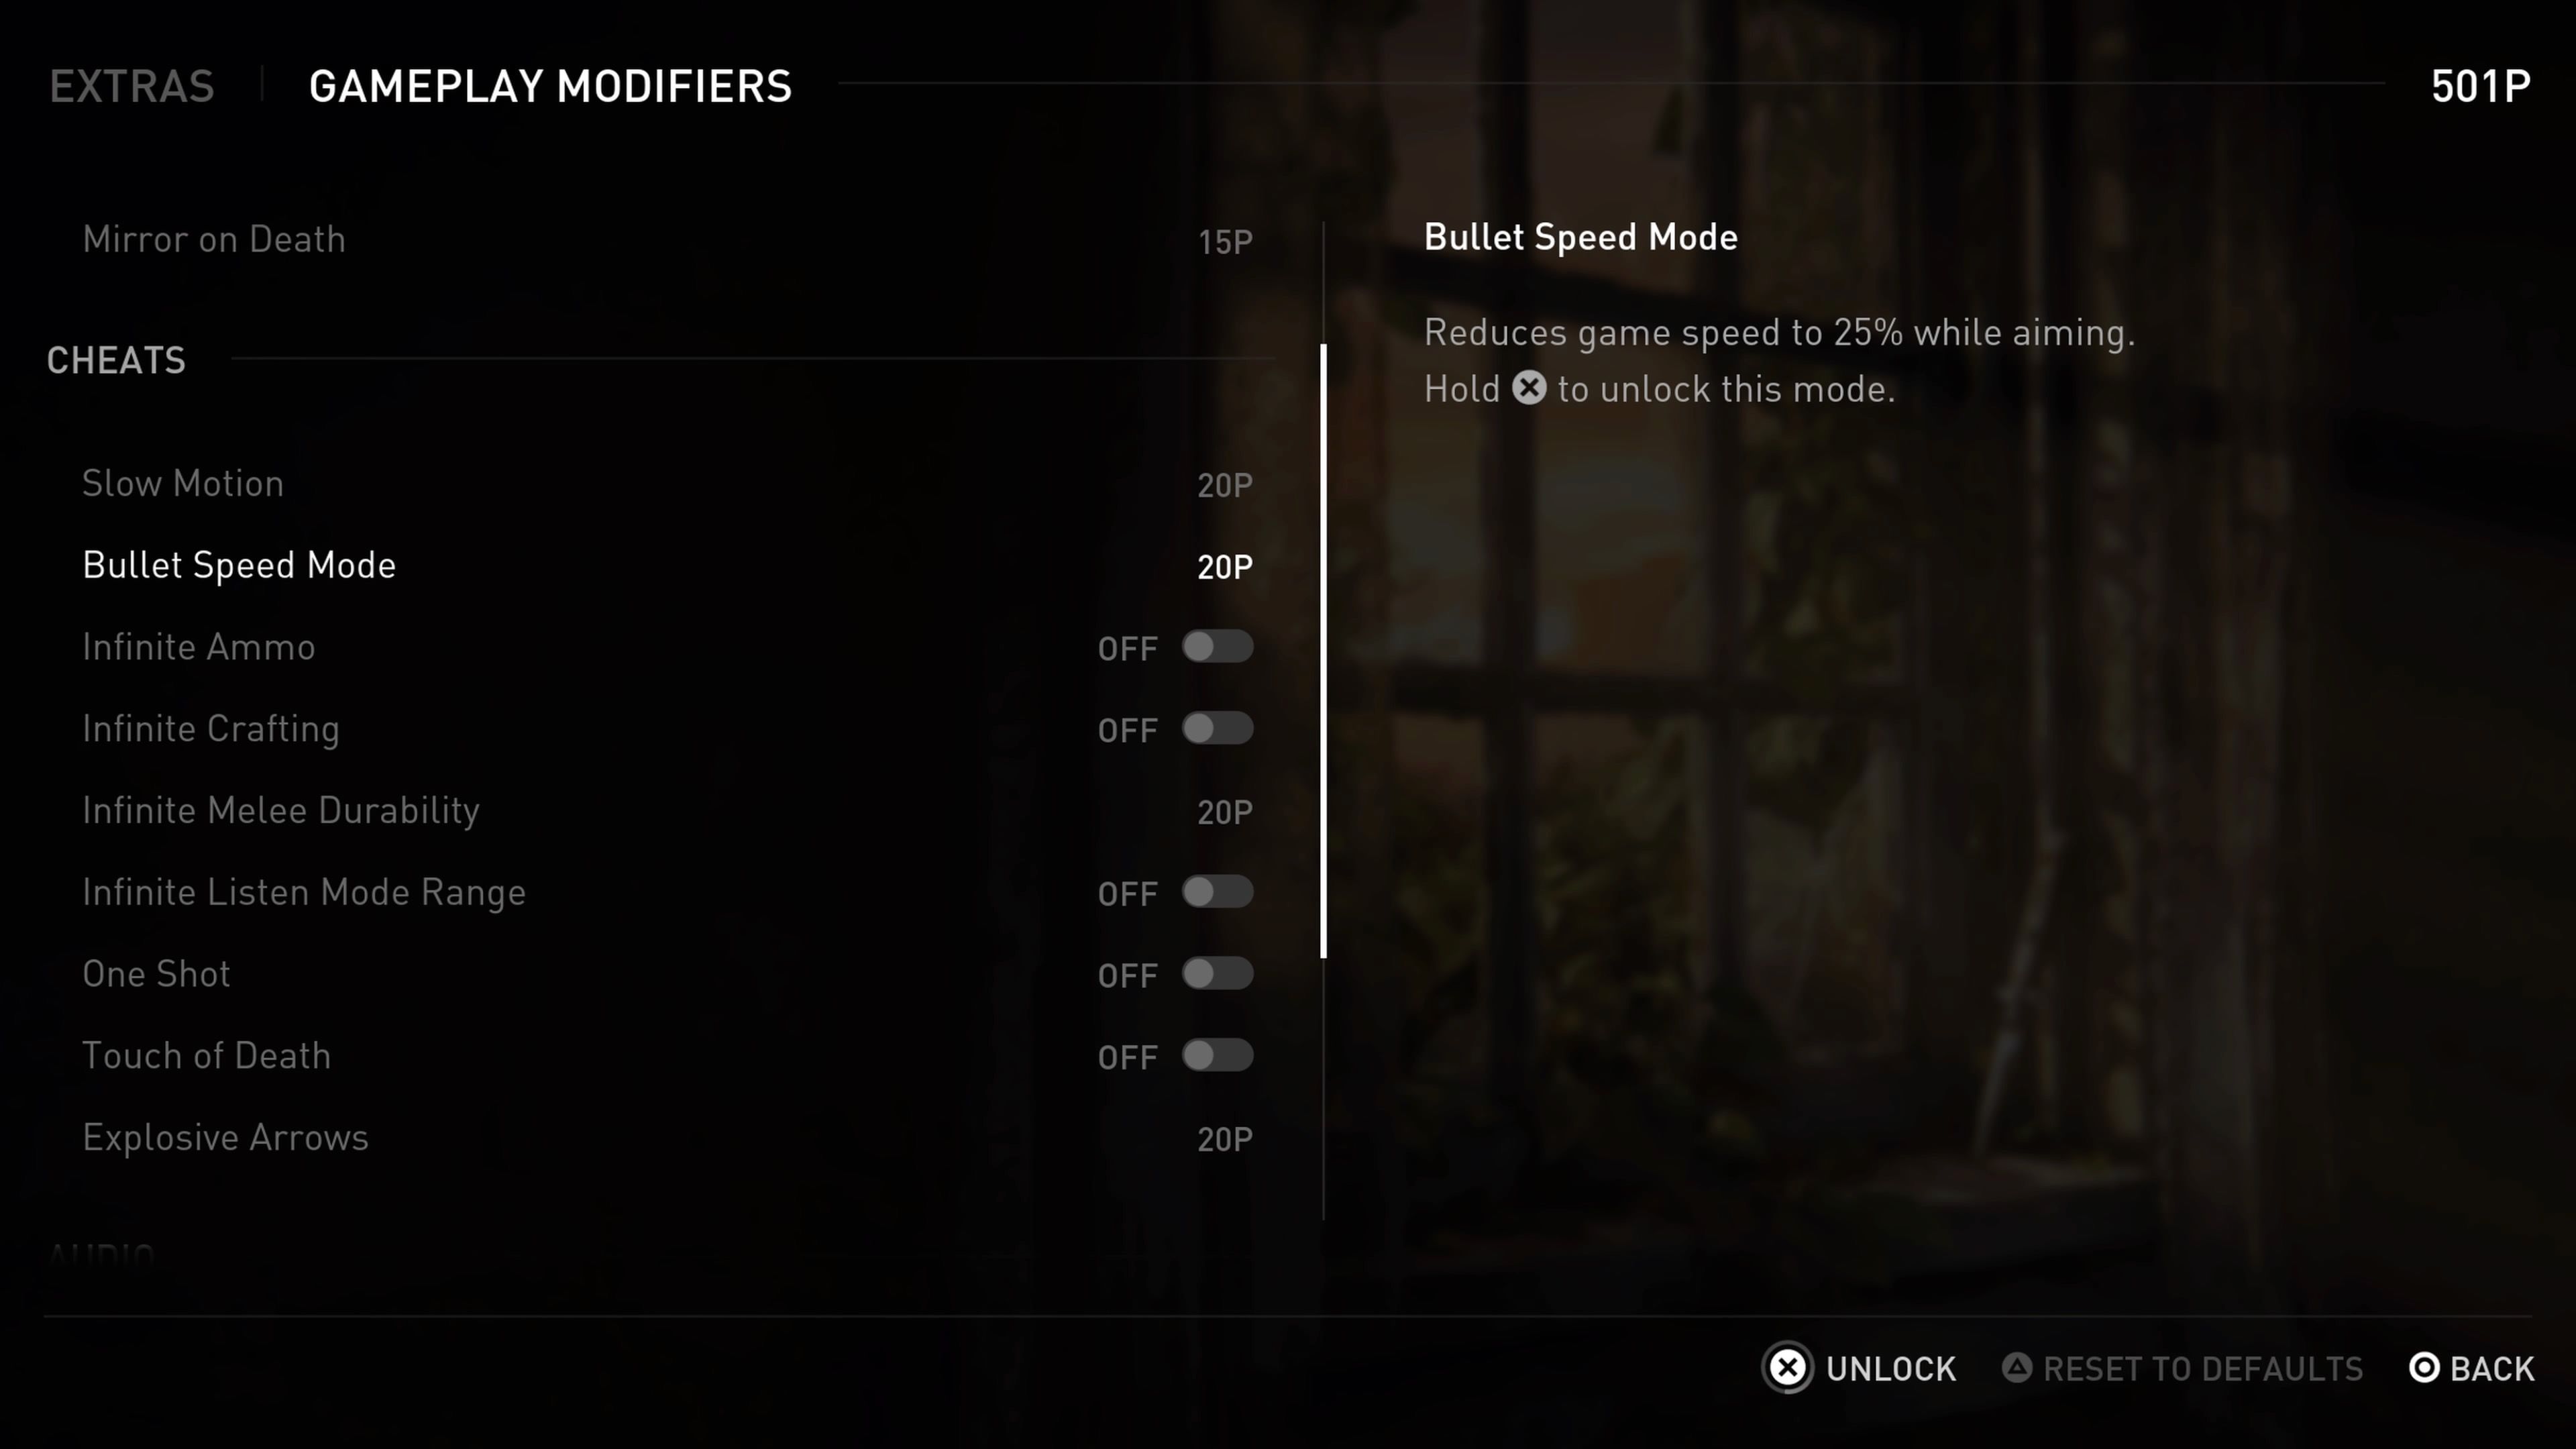 The Last of Us Remake Gameplay Modifiers